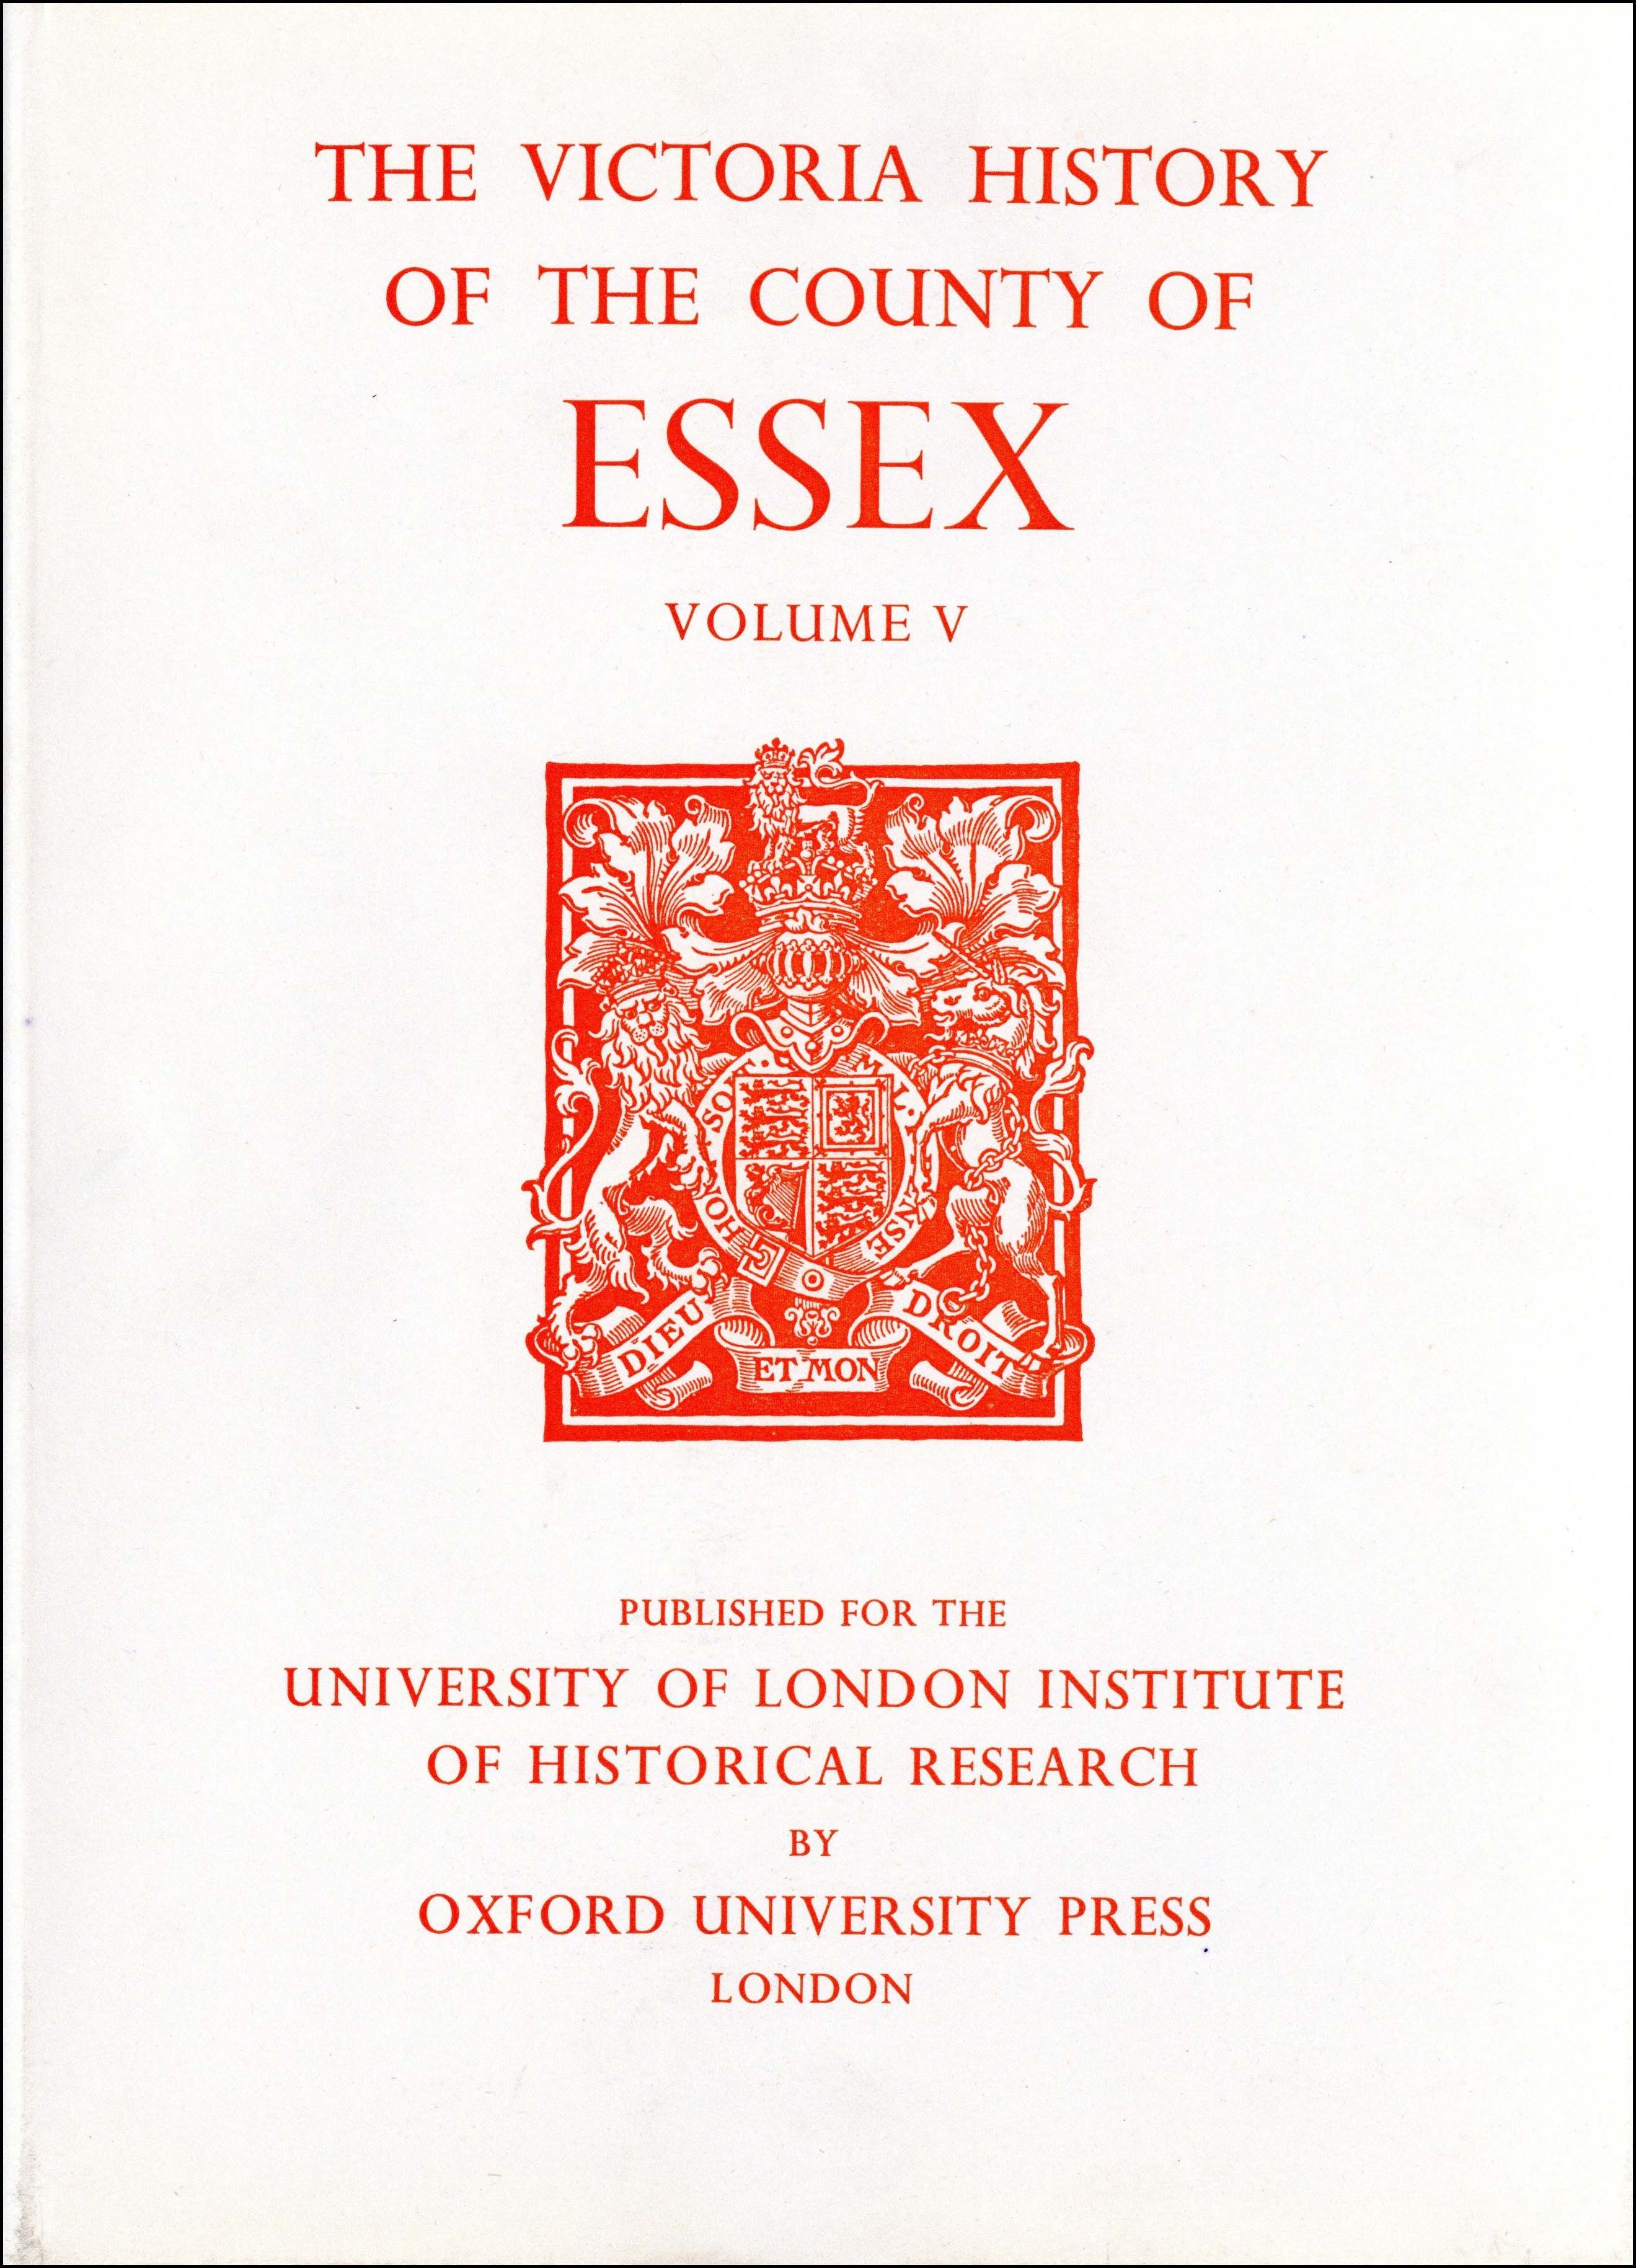 The Victoria History of the County of Essex